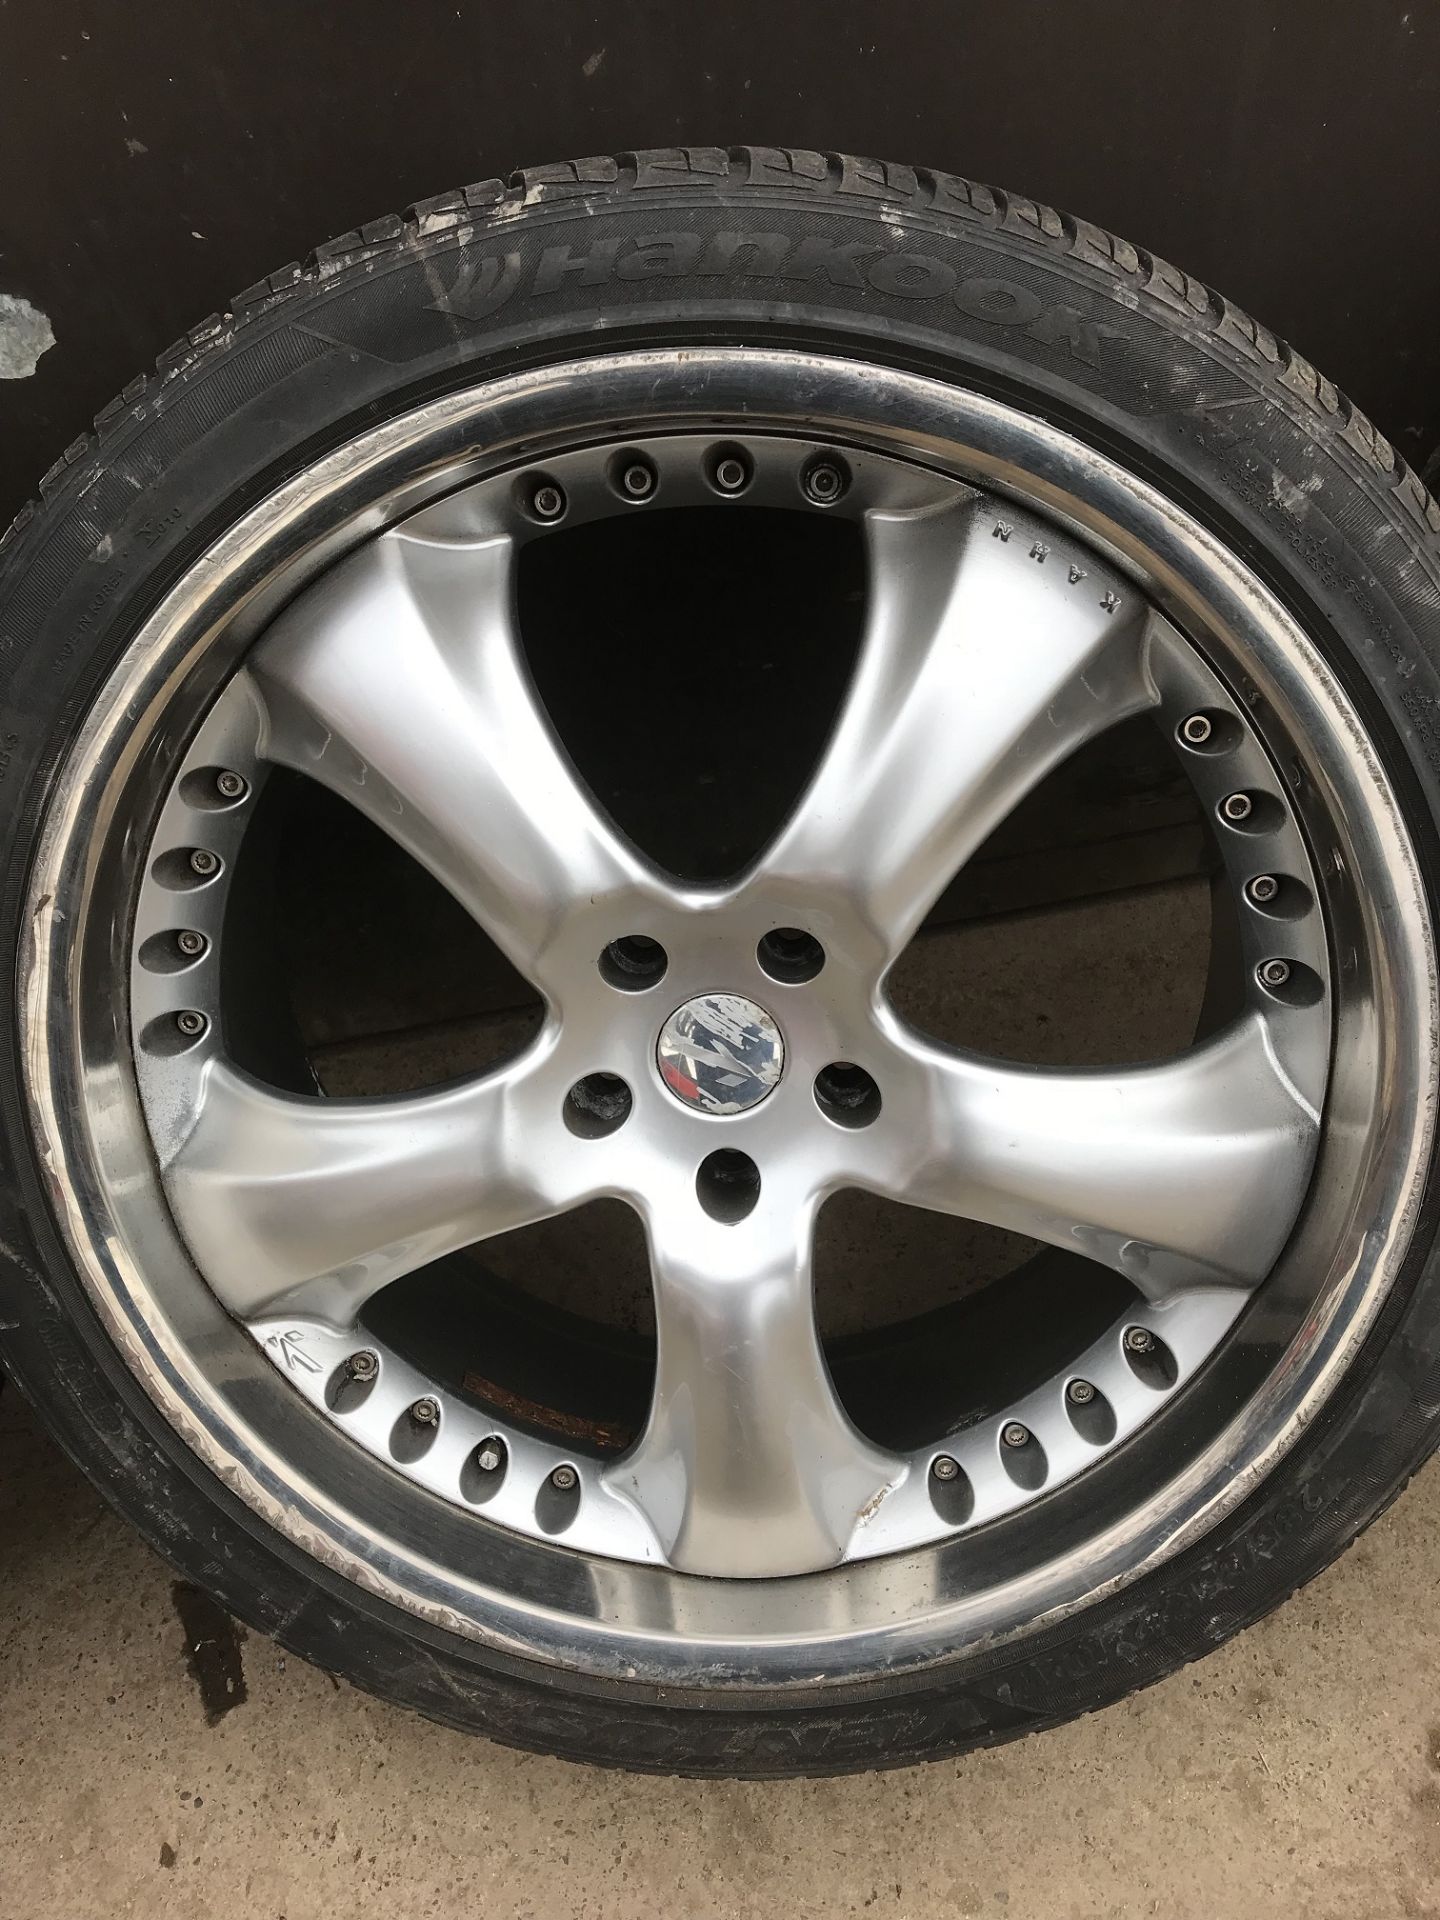 KAHN 22" ALLOY WHEELS AND TYRES. SIZE 285/35R 22 108W *PLUS VAT* - Image 3 of 5